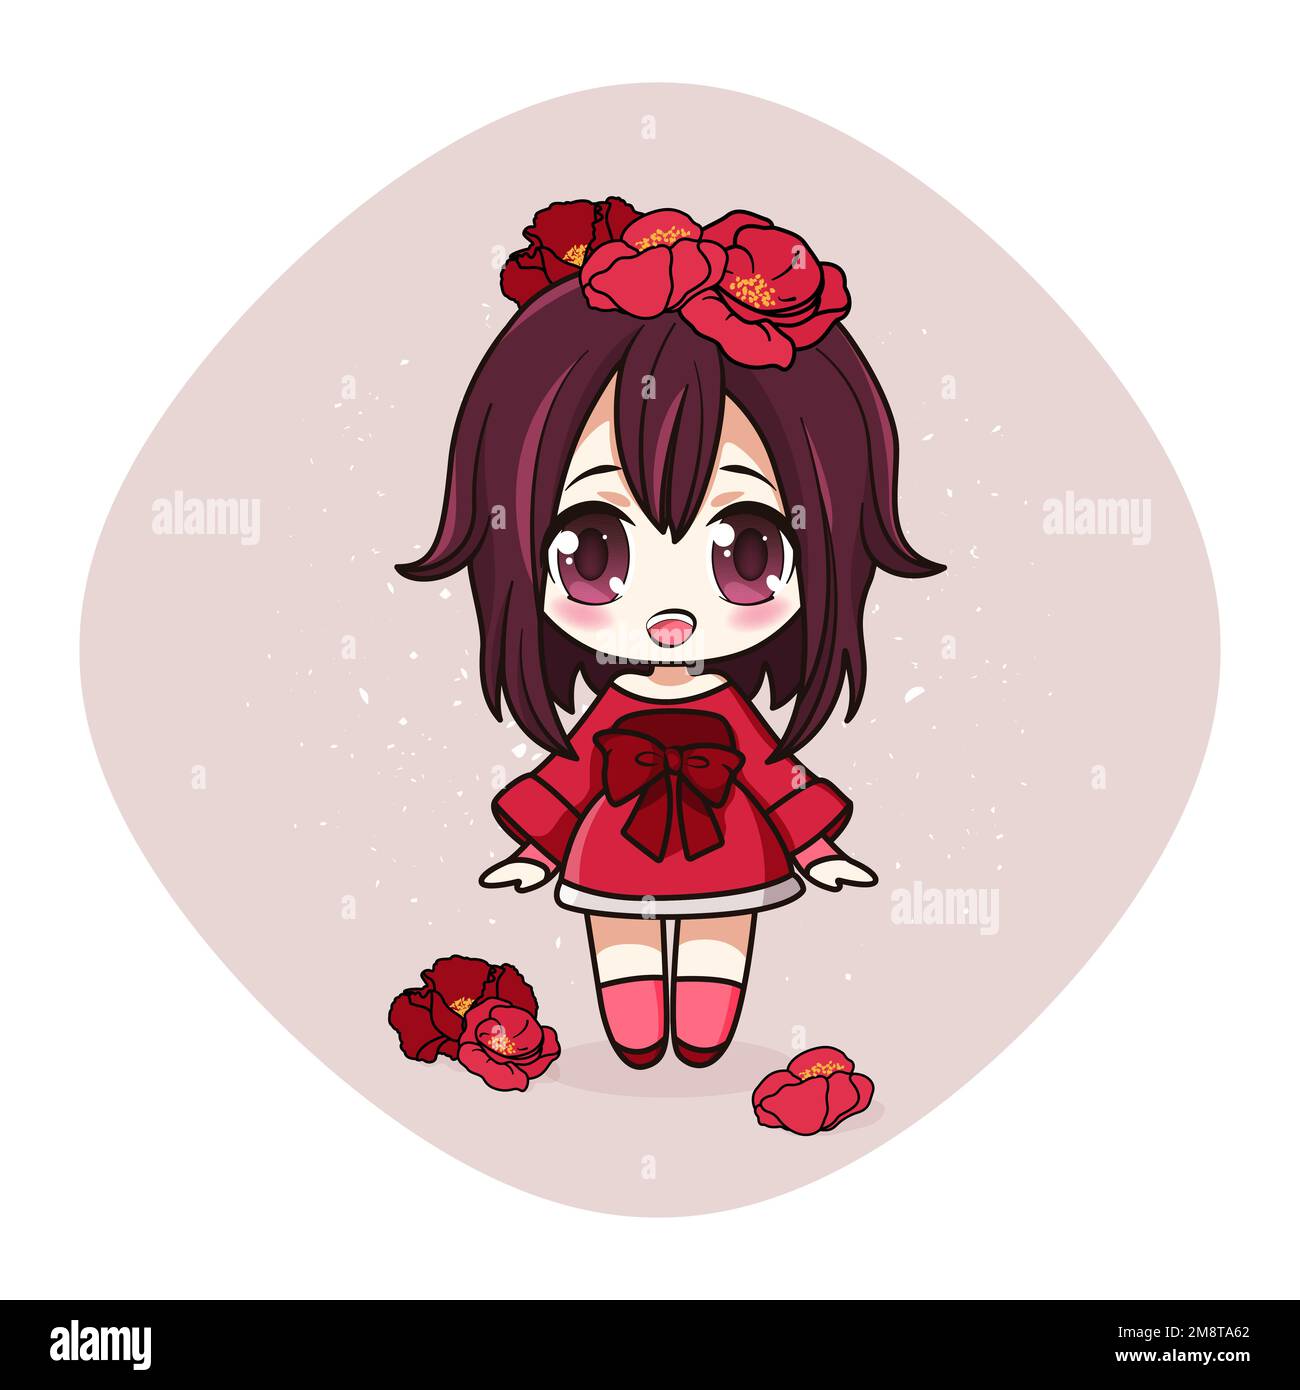 Cute and kawaii girl with red poppies. Manga chibi with flowers. Stock Vector